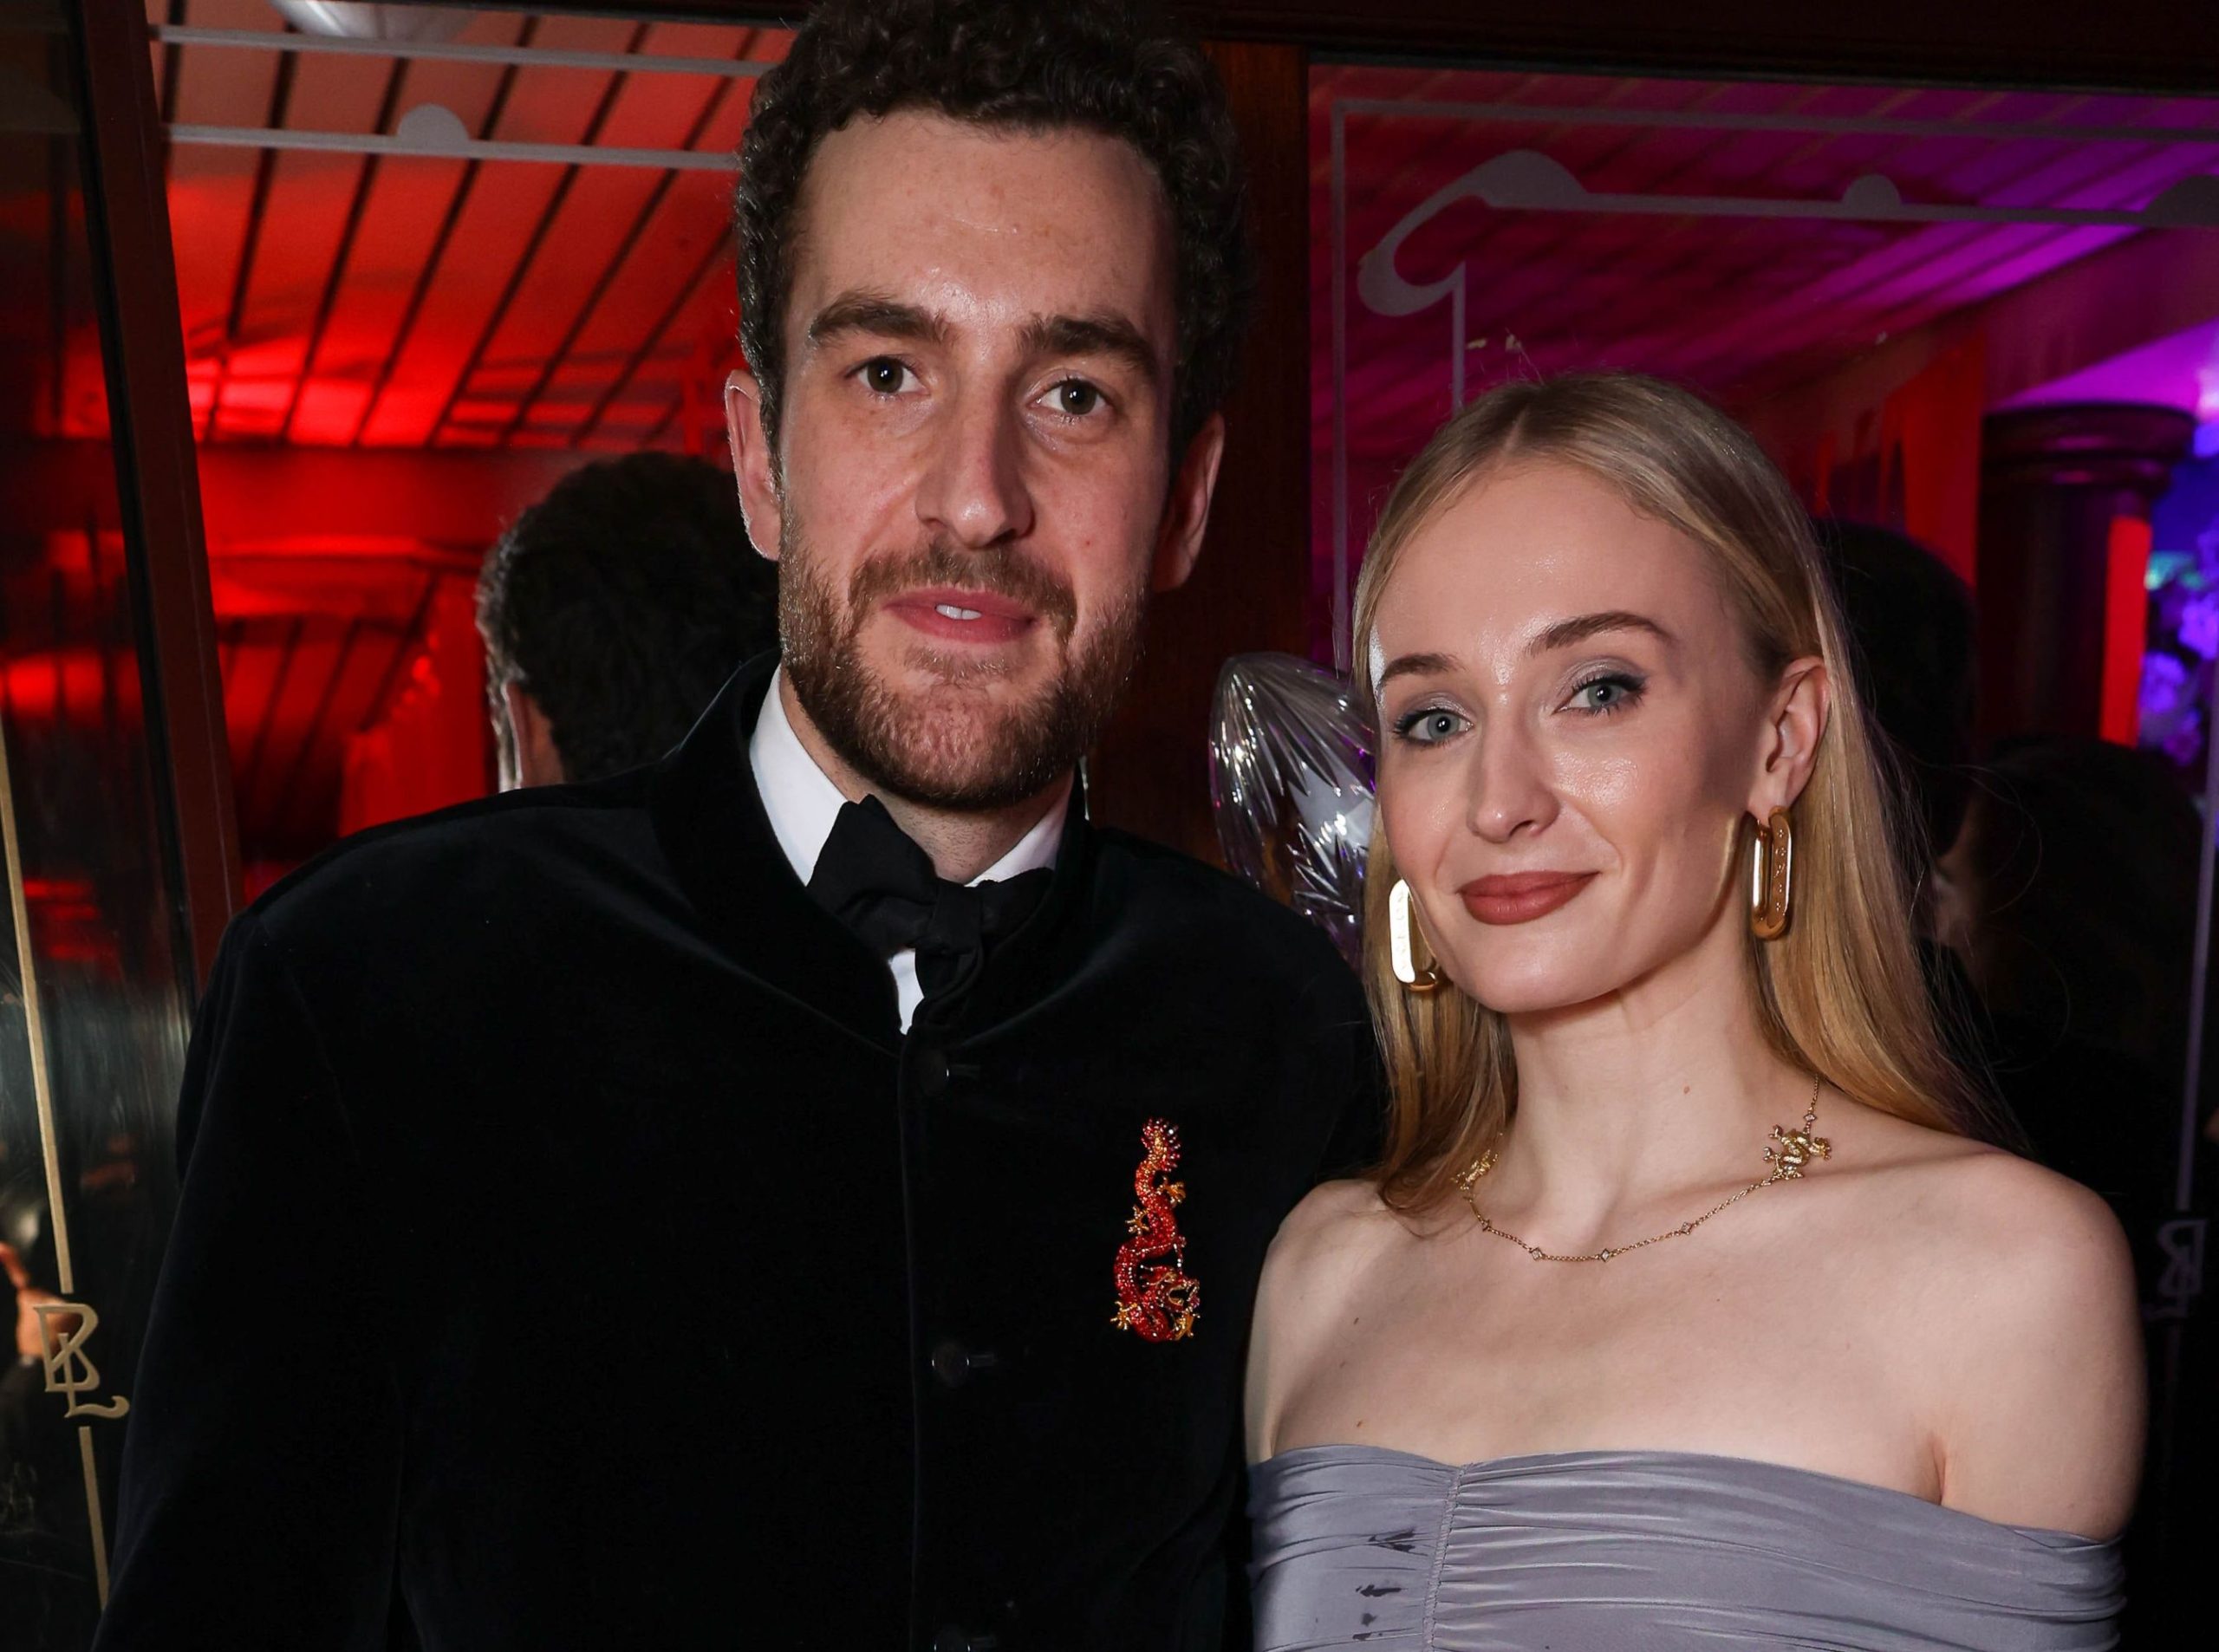 Sophie Turner Wore the Final ‘Revenge Gown’ Search for Her Couple Debut With Peregrine Pearson